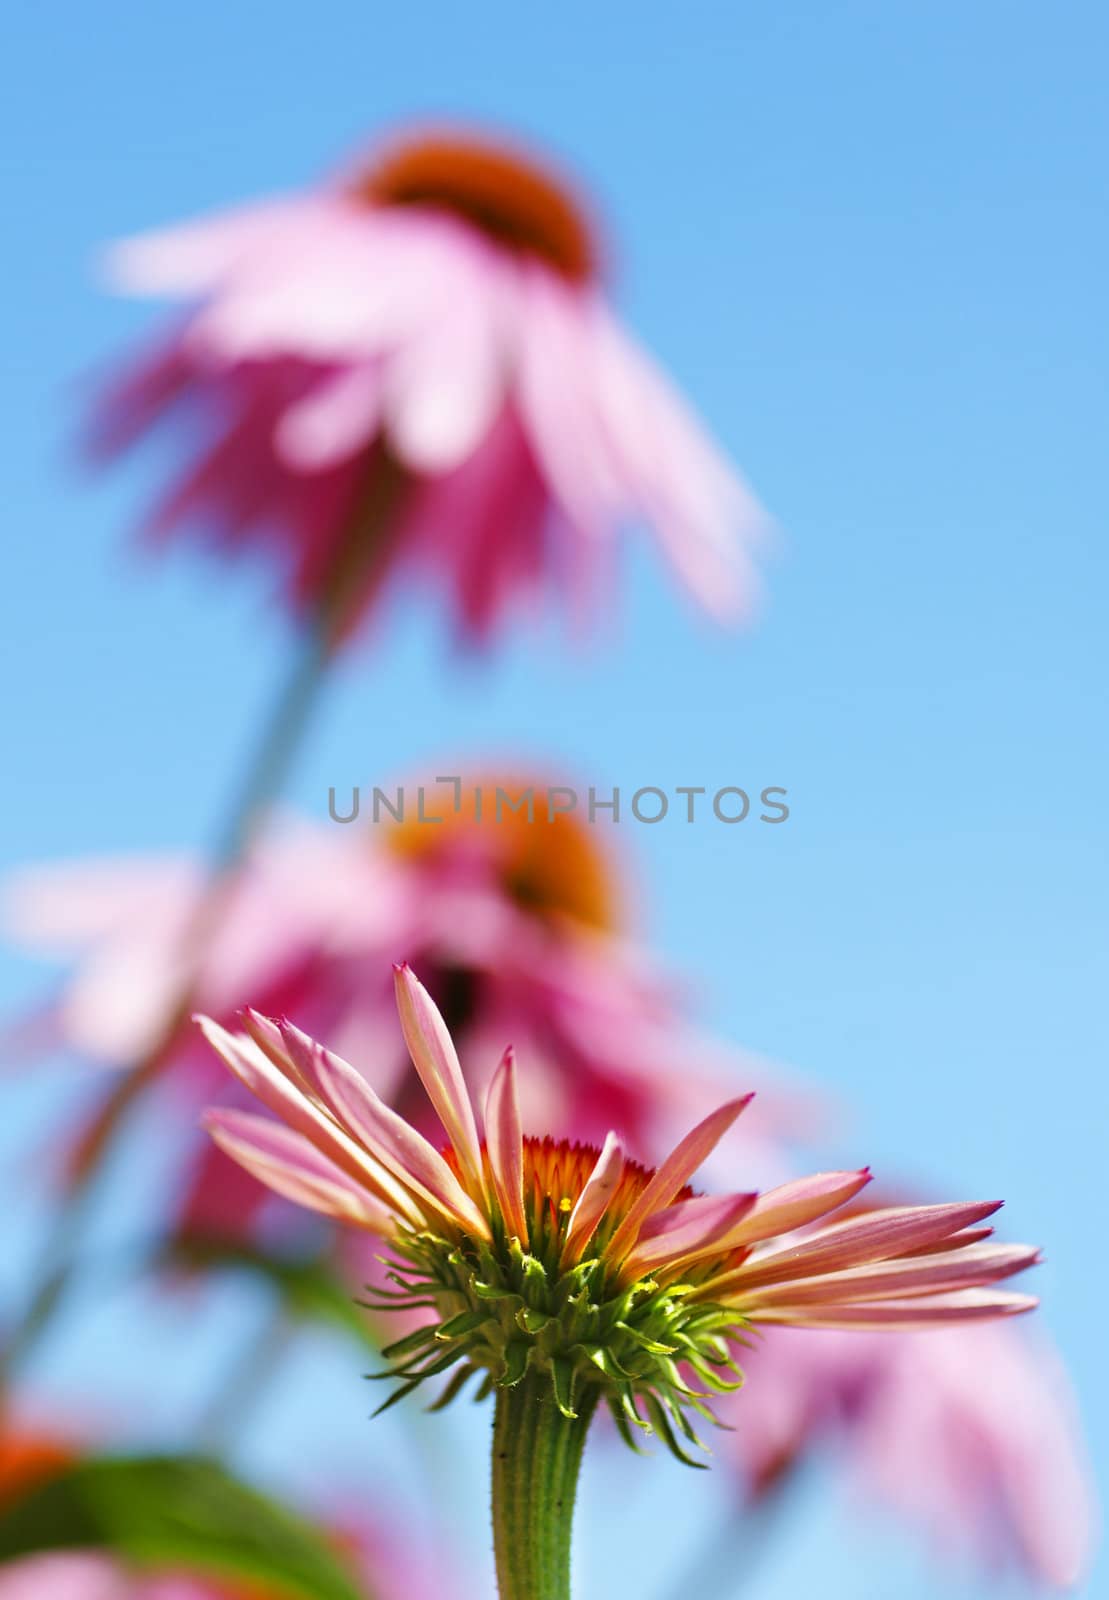 Vertical coneflowers and sky by Mirage3